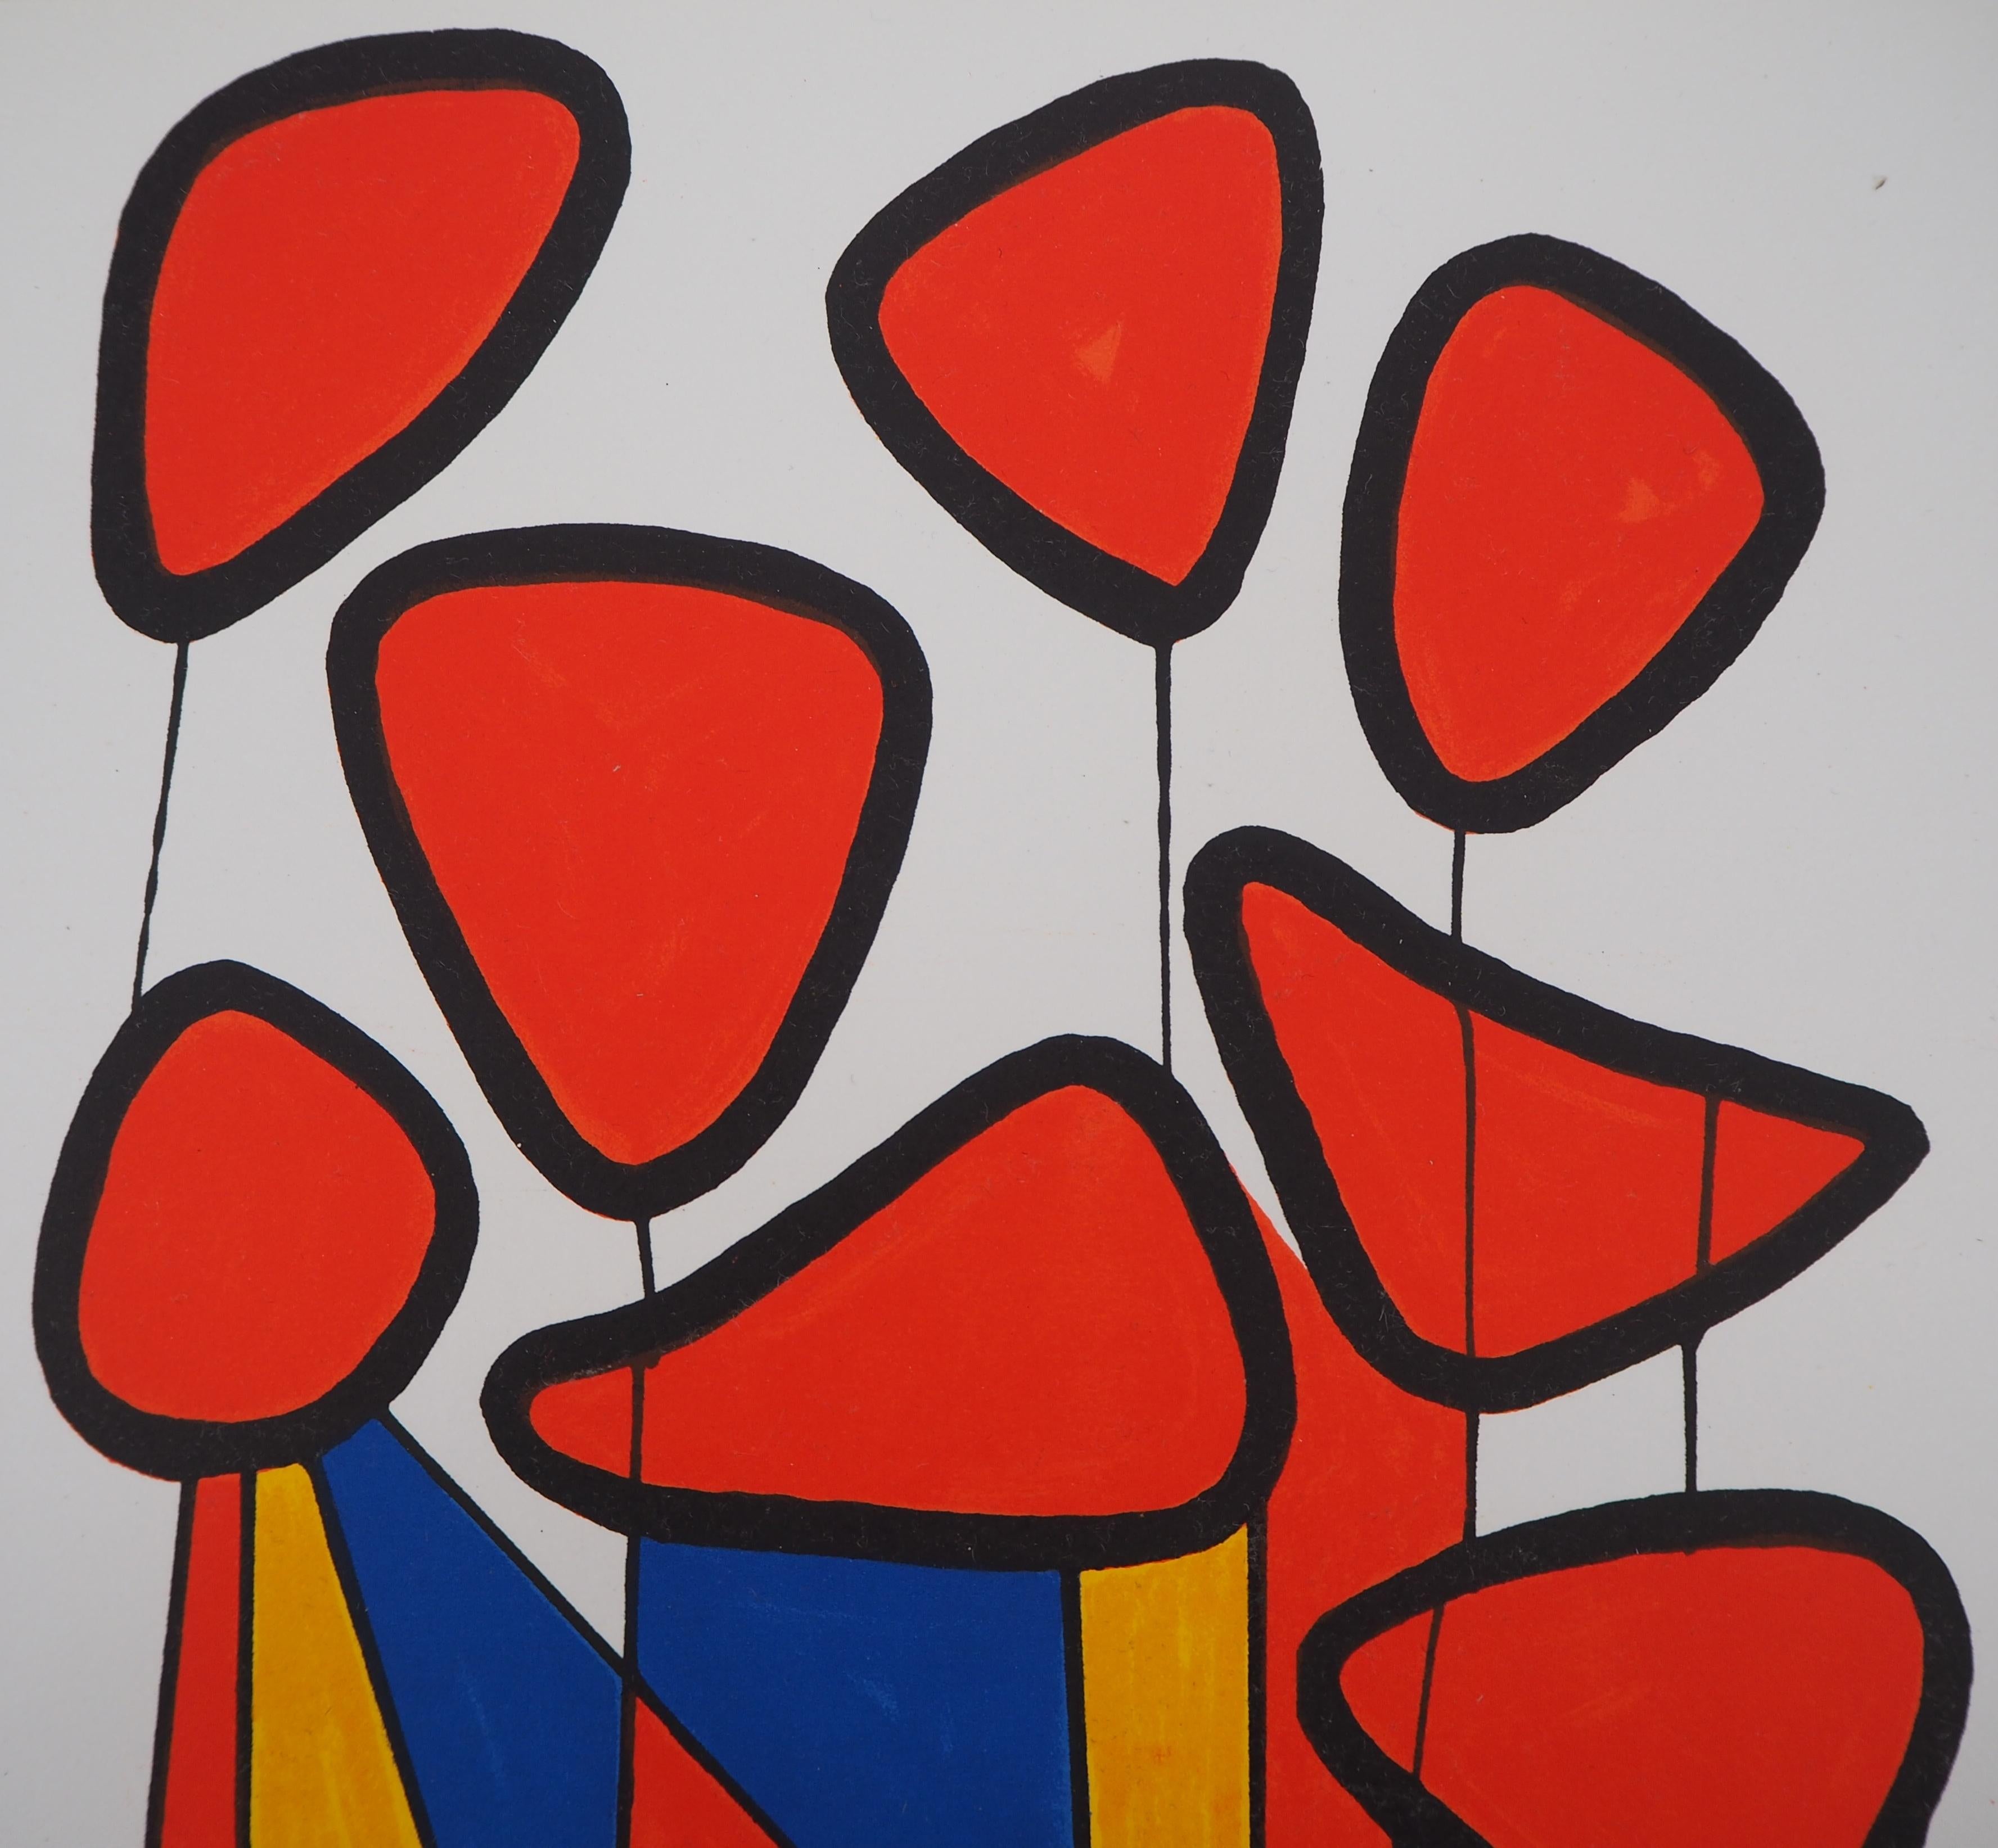 Composition in Red, Yellow and Blue - lithograph - Mourlot, 1972 - Abstract Print by Alexander Calder